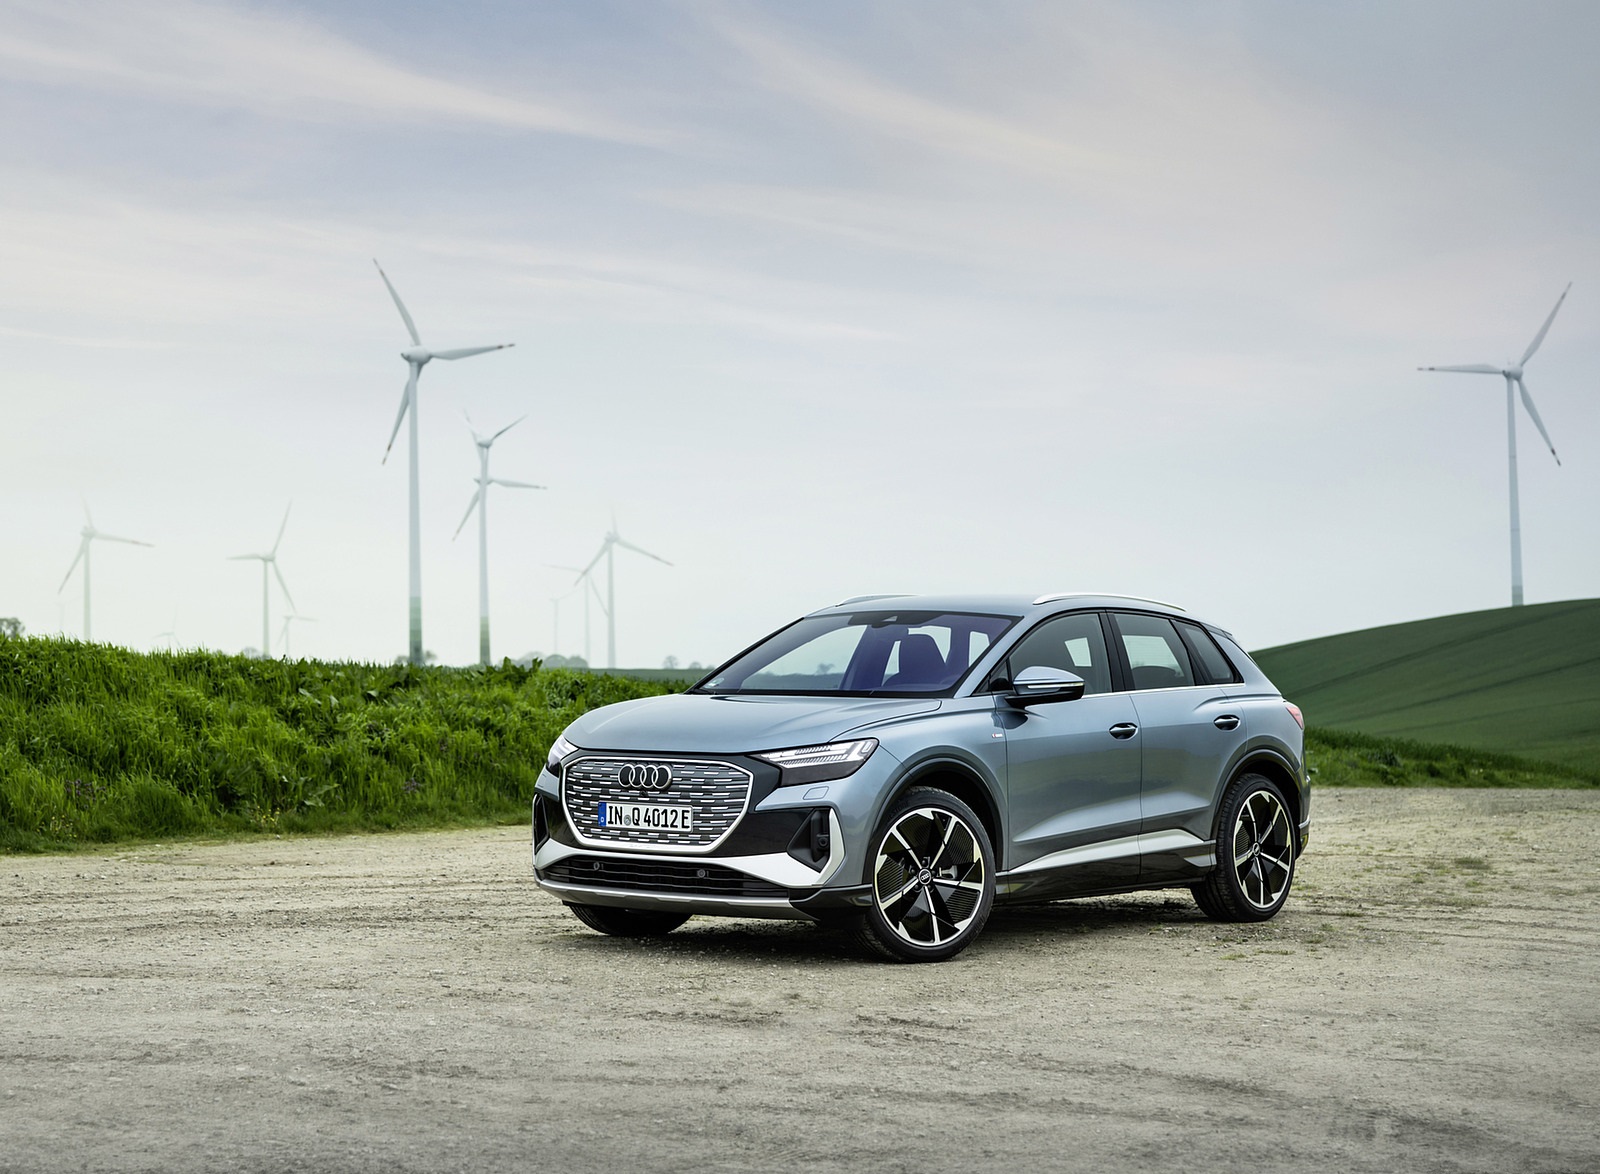 2022 Audi Q4 e-tron (Color: Geyser Blue) Front Three-Quarter Wallpapers  #12 of 183